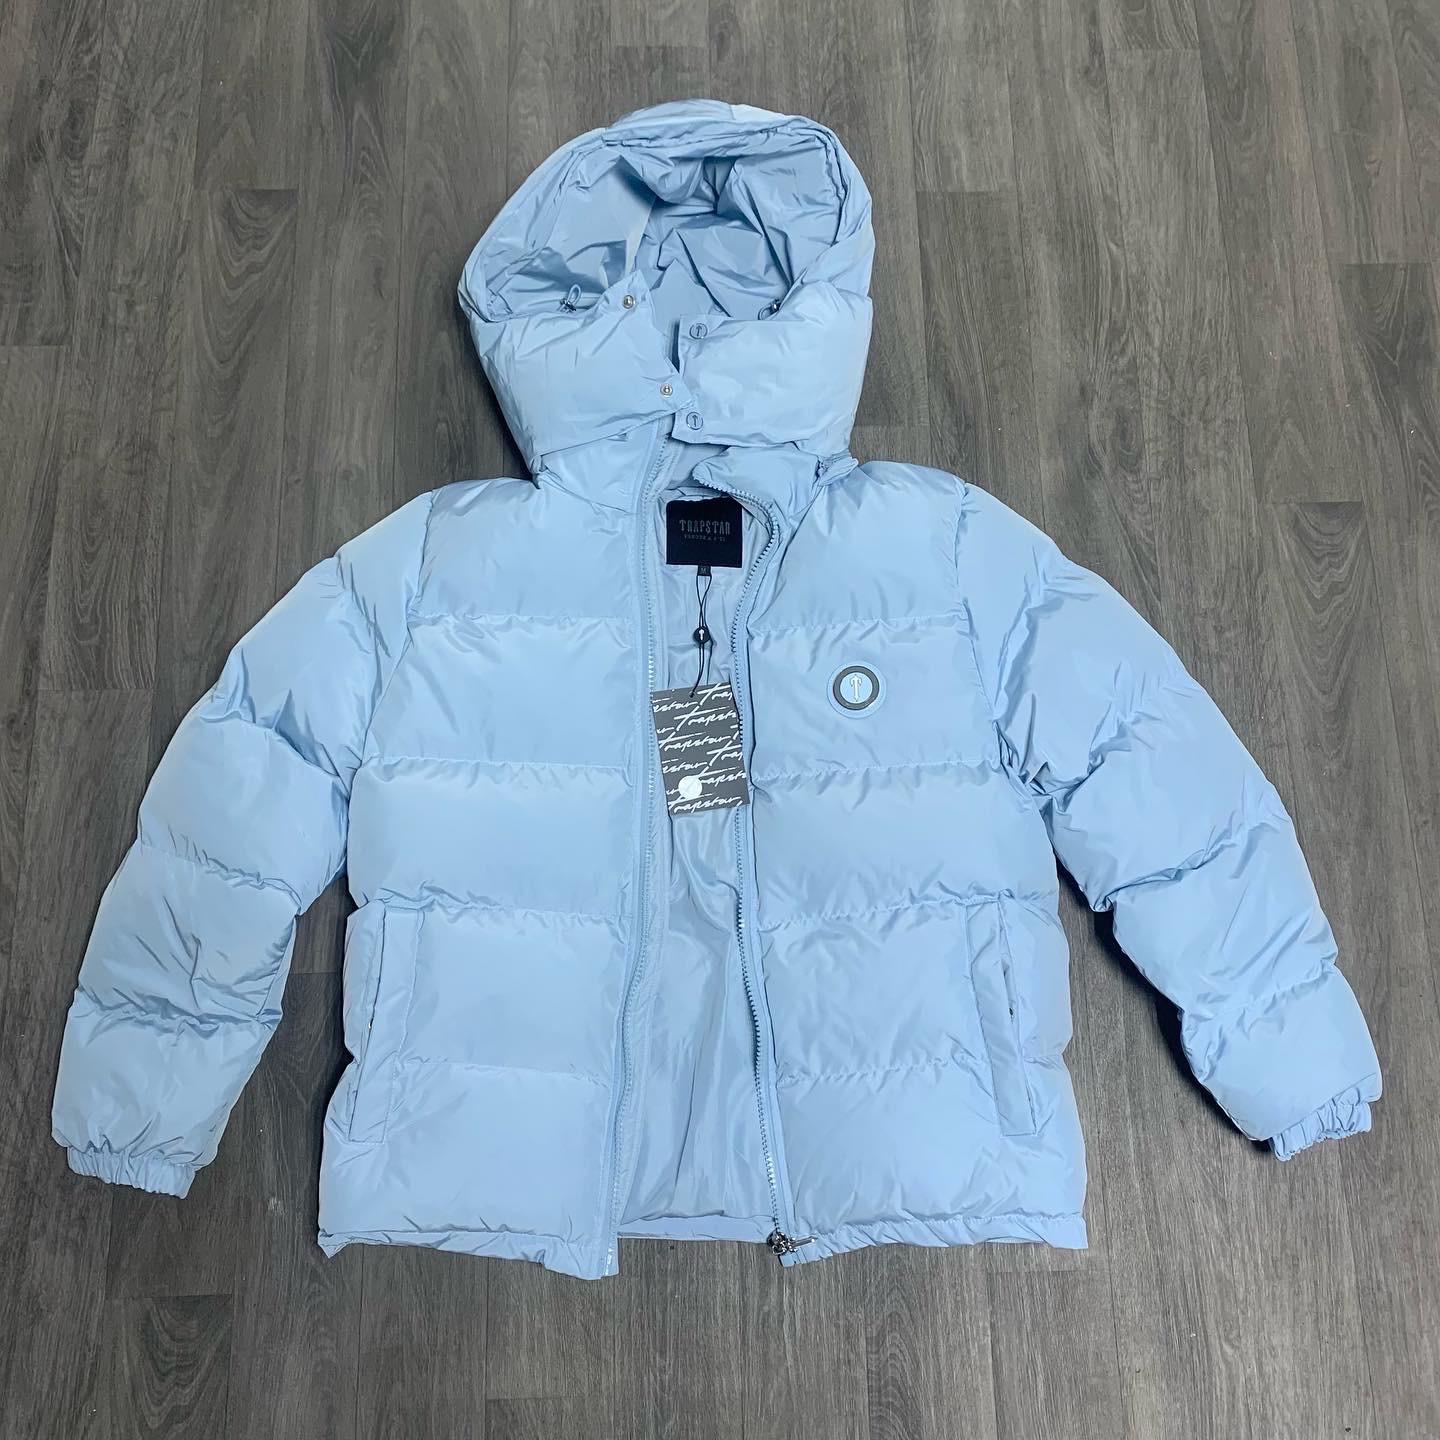 Baby blue trapstar jacket in BL3 Bolton for £249.00 for sale | Shpock